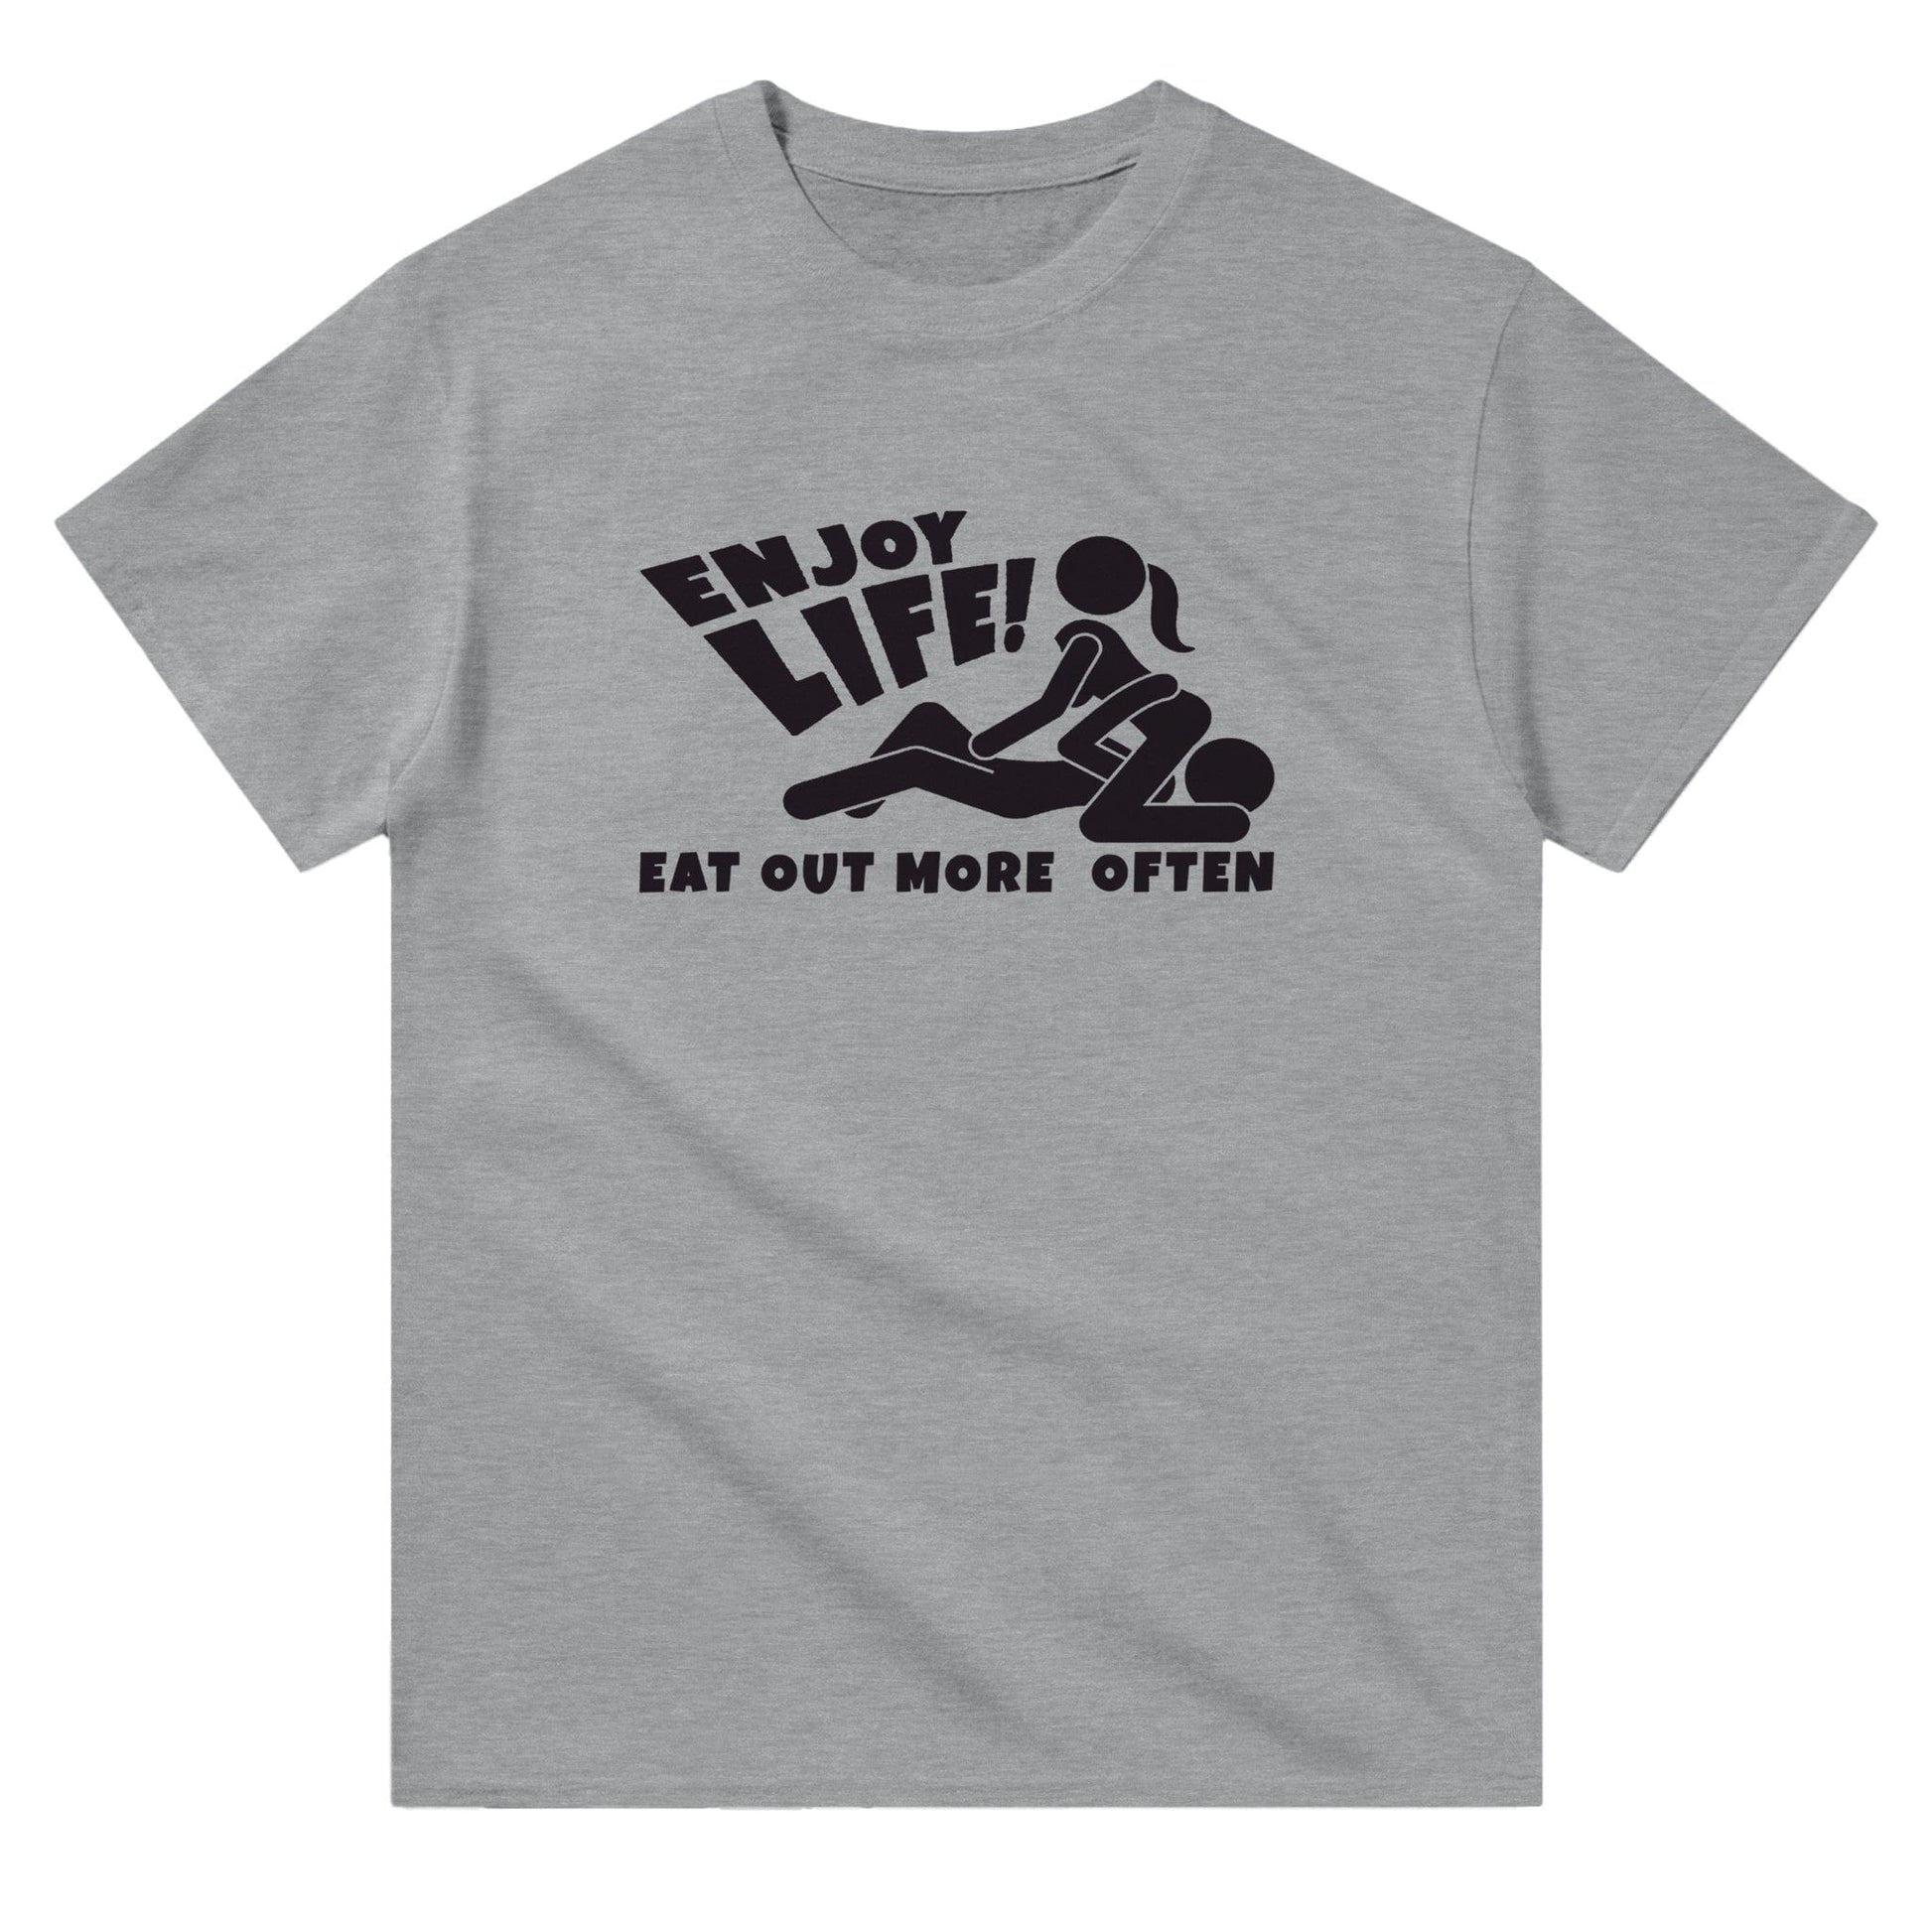 Enjoy Life Eat Out More Often T-shirt Graphic Tee Sports Grey / S BC Australia